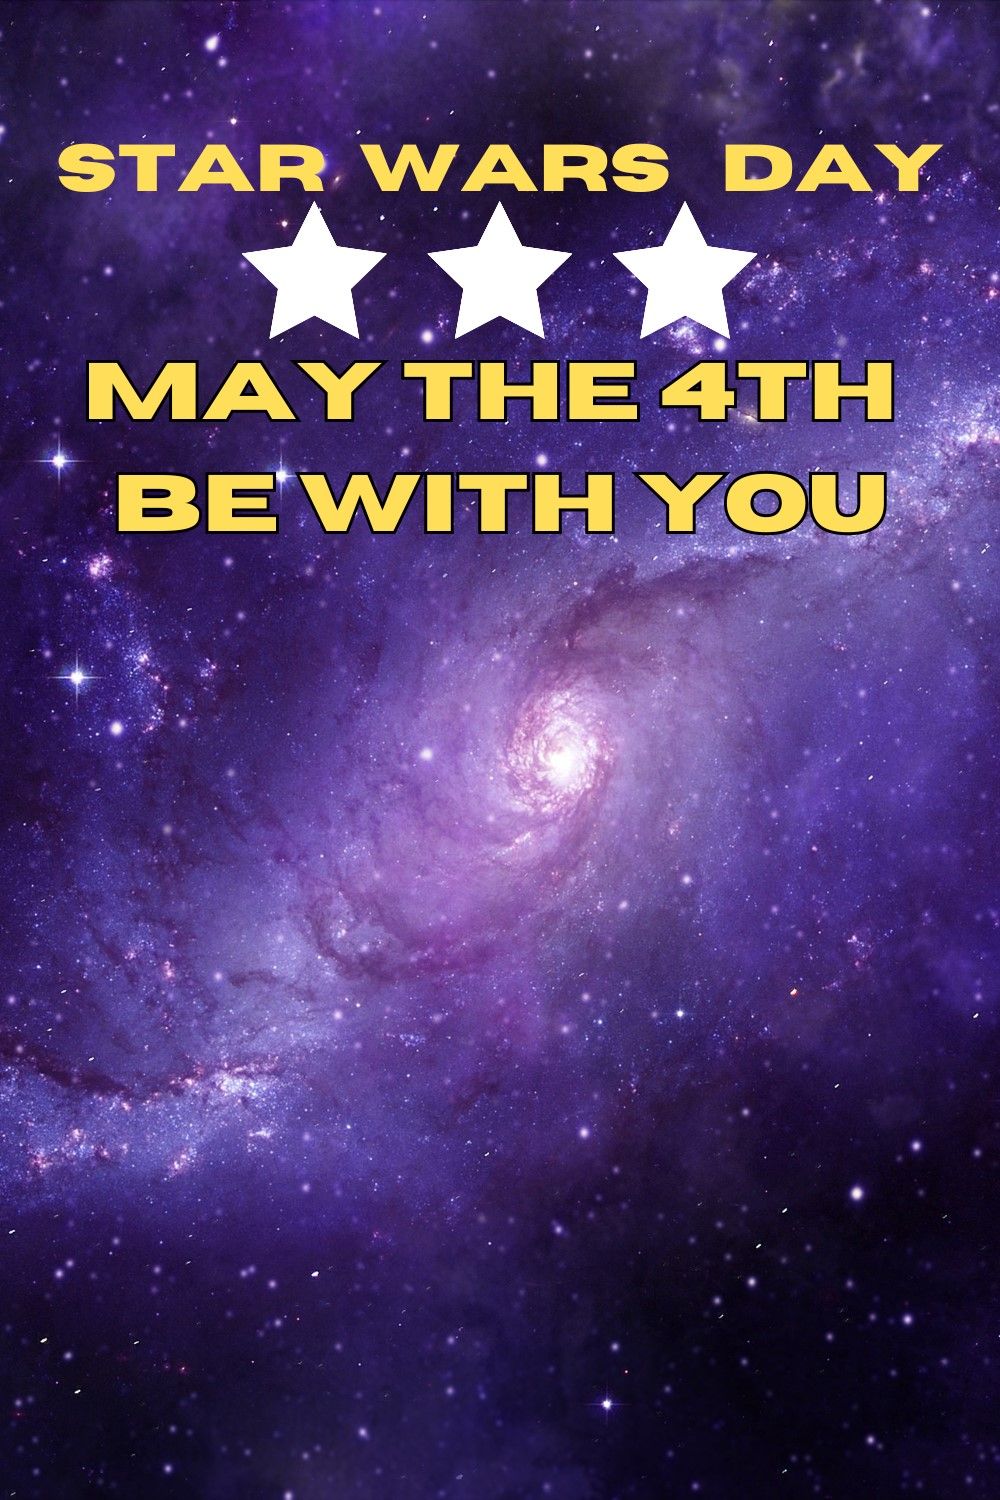 May the Force Be With You on May the Fourth